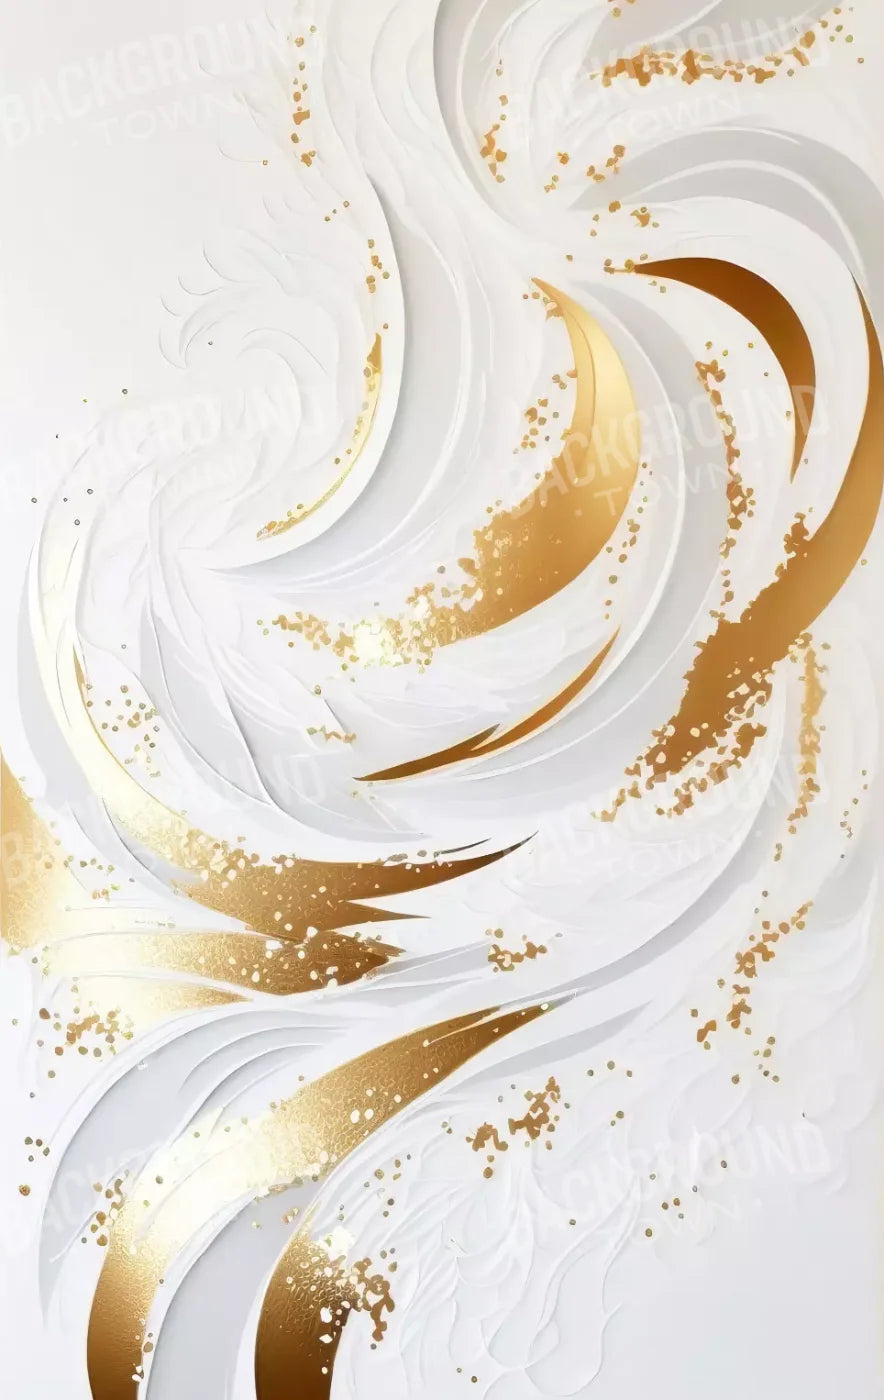 Abstract Swirl In White And Gold 10X16 Ultracloth ( 120 X 192 Inch ) Backdrop